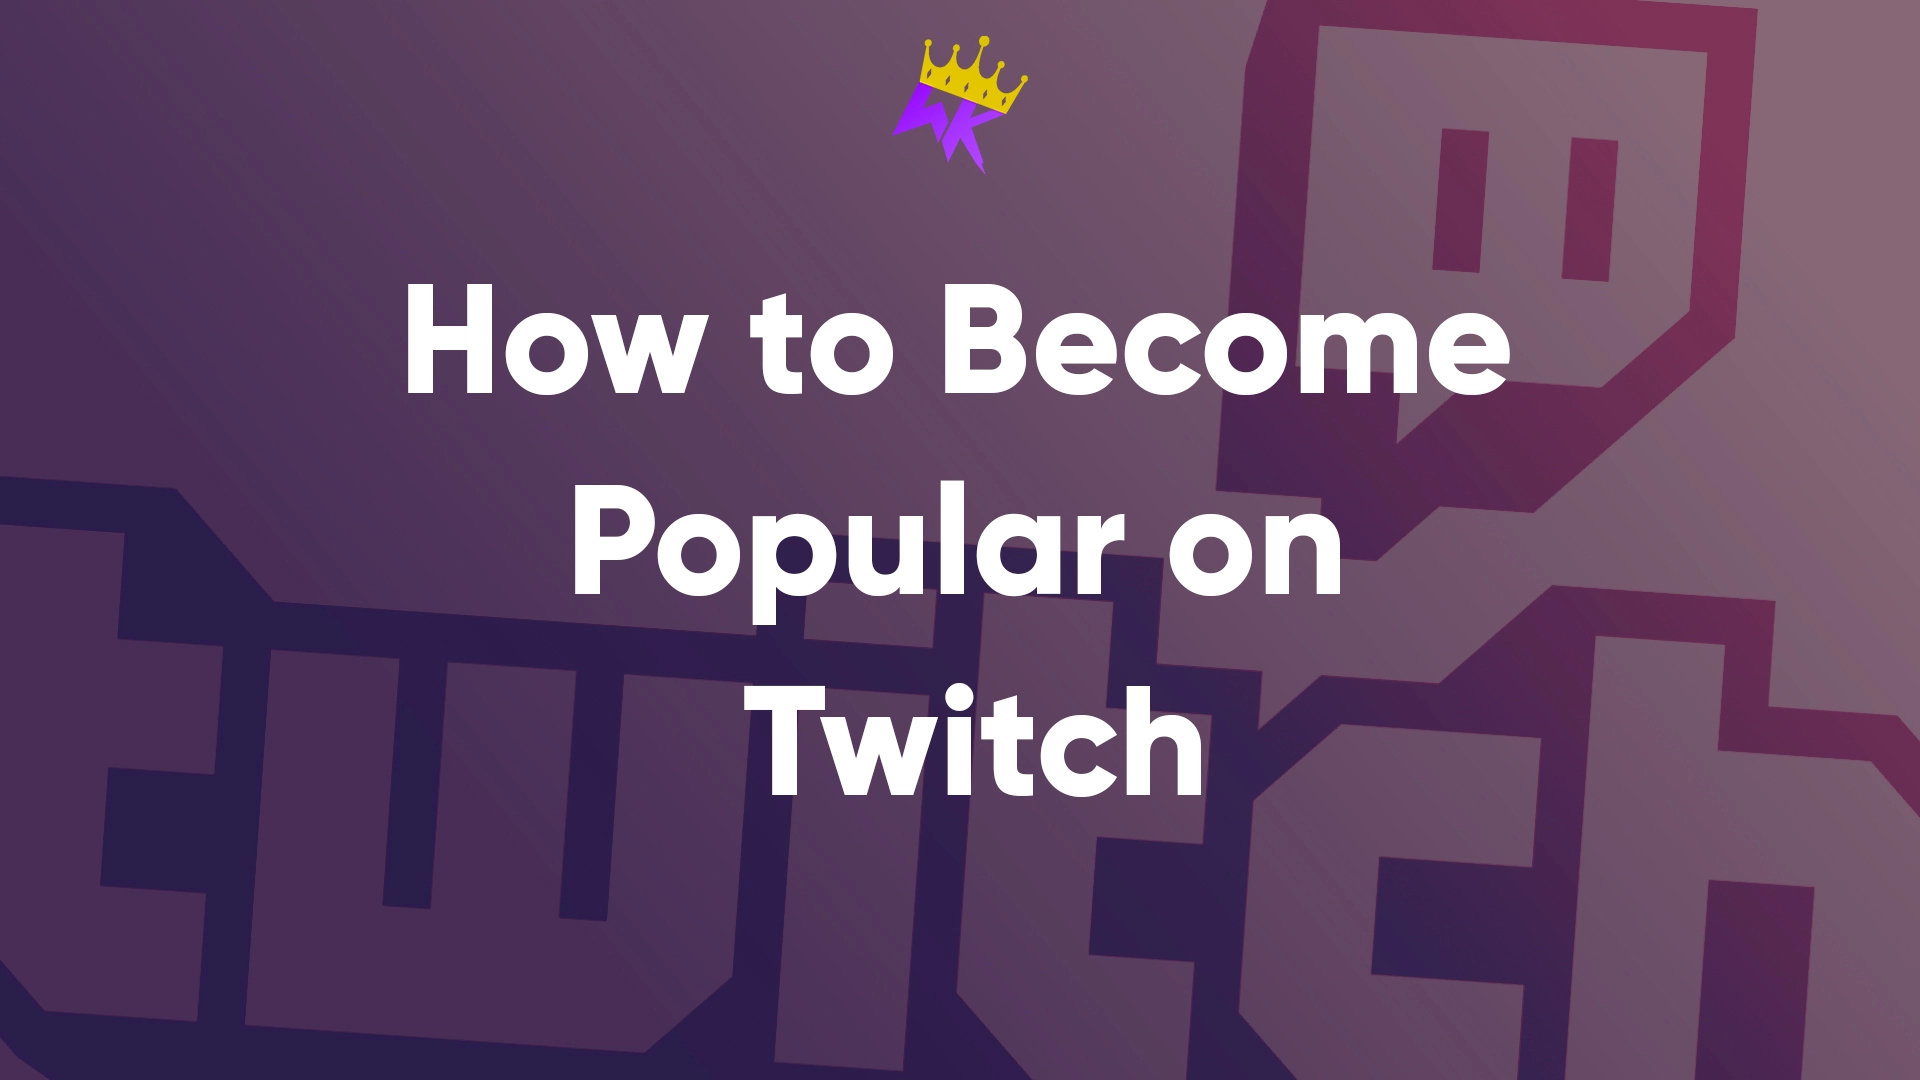 How to Become Popular on Twitch